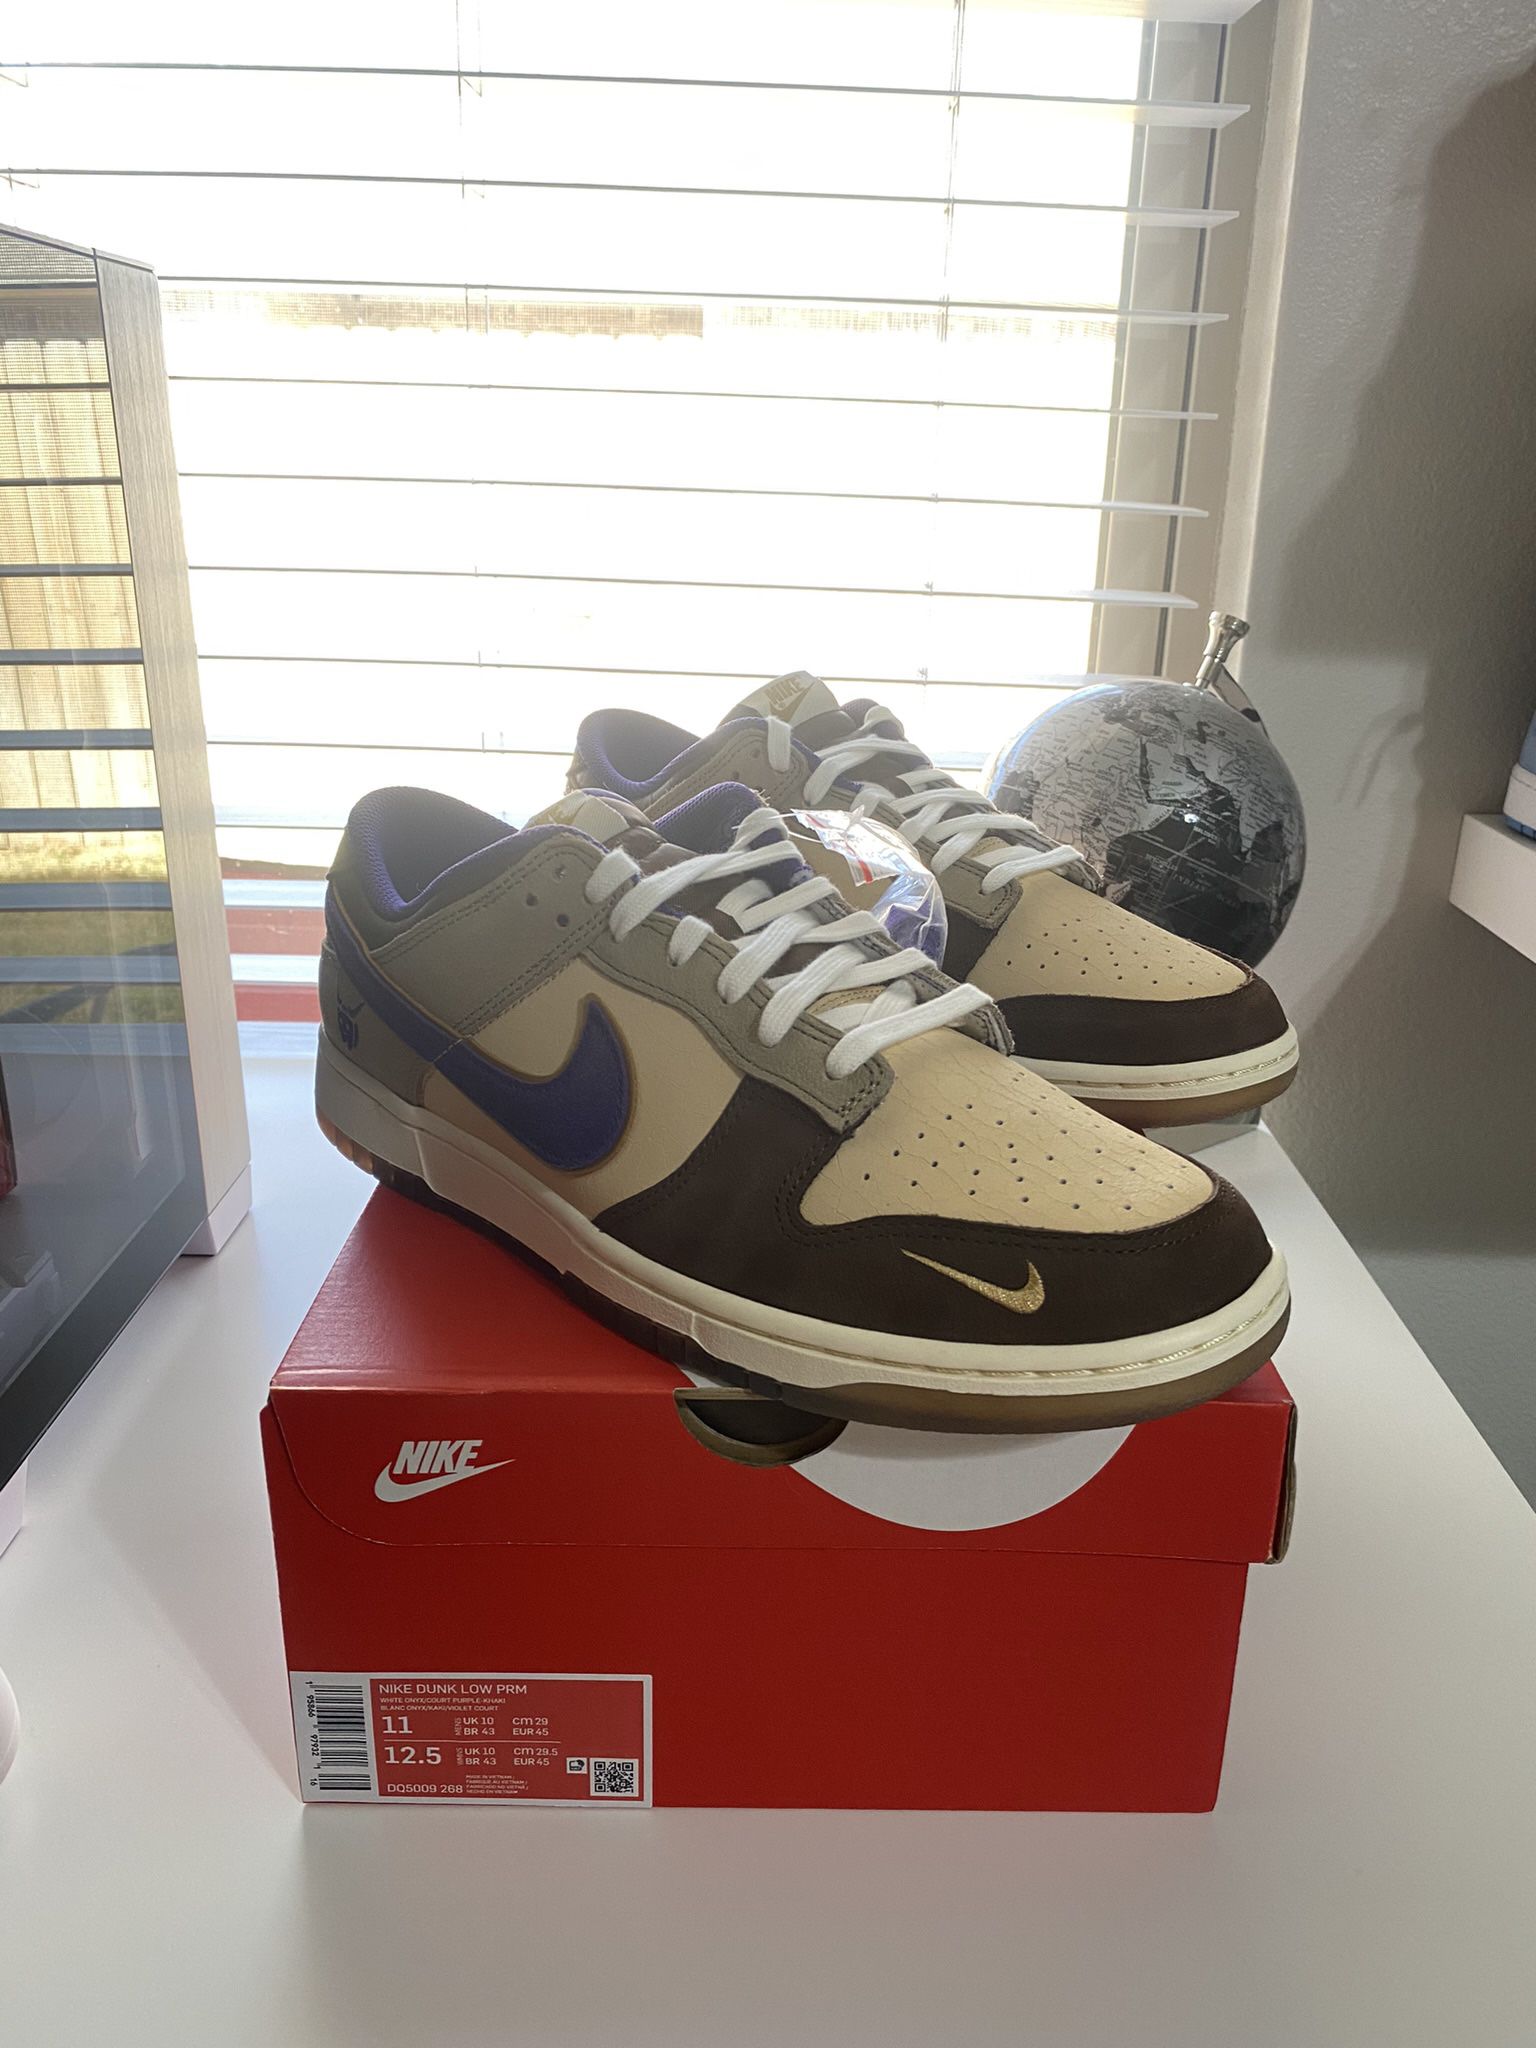 Nike Dunk Low Setsburn Size 11 for Sale in Plano, TX - OfferUp